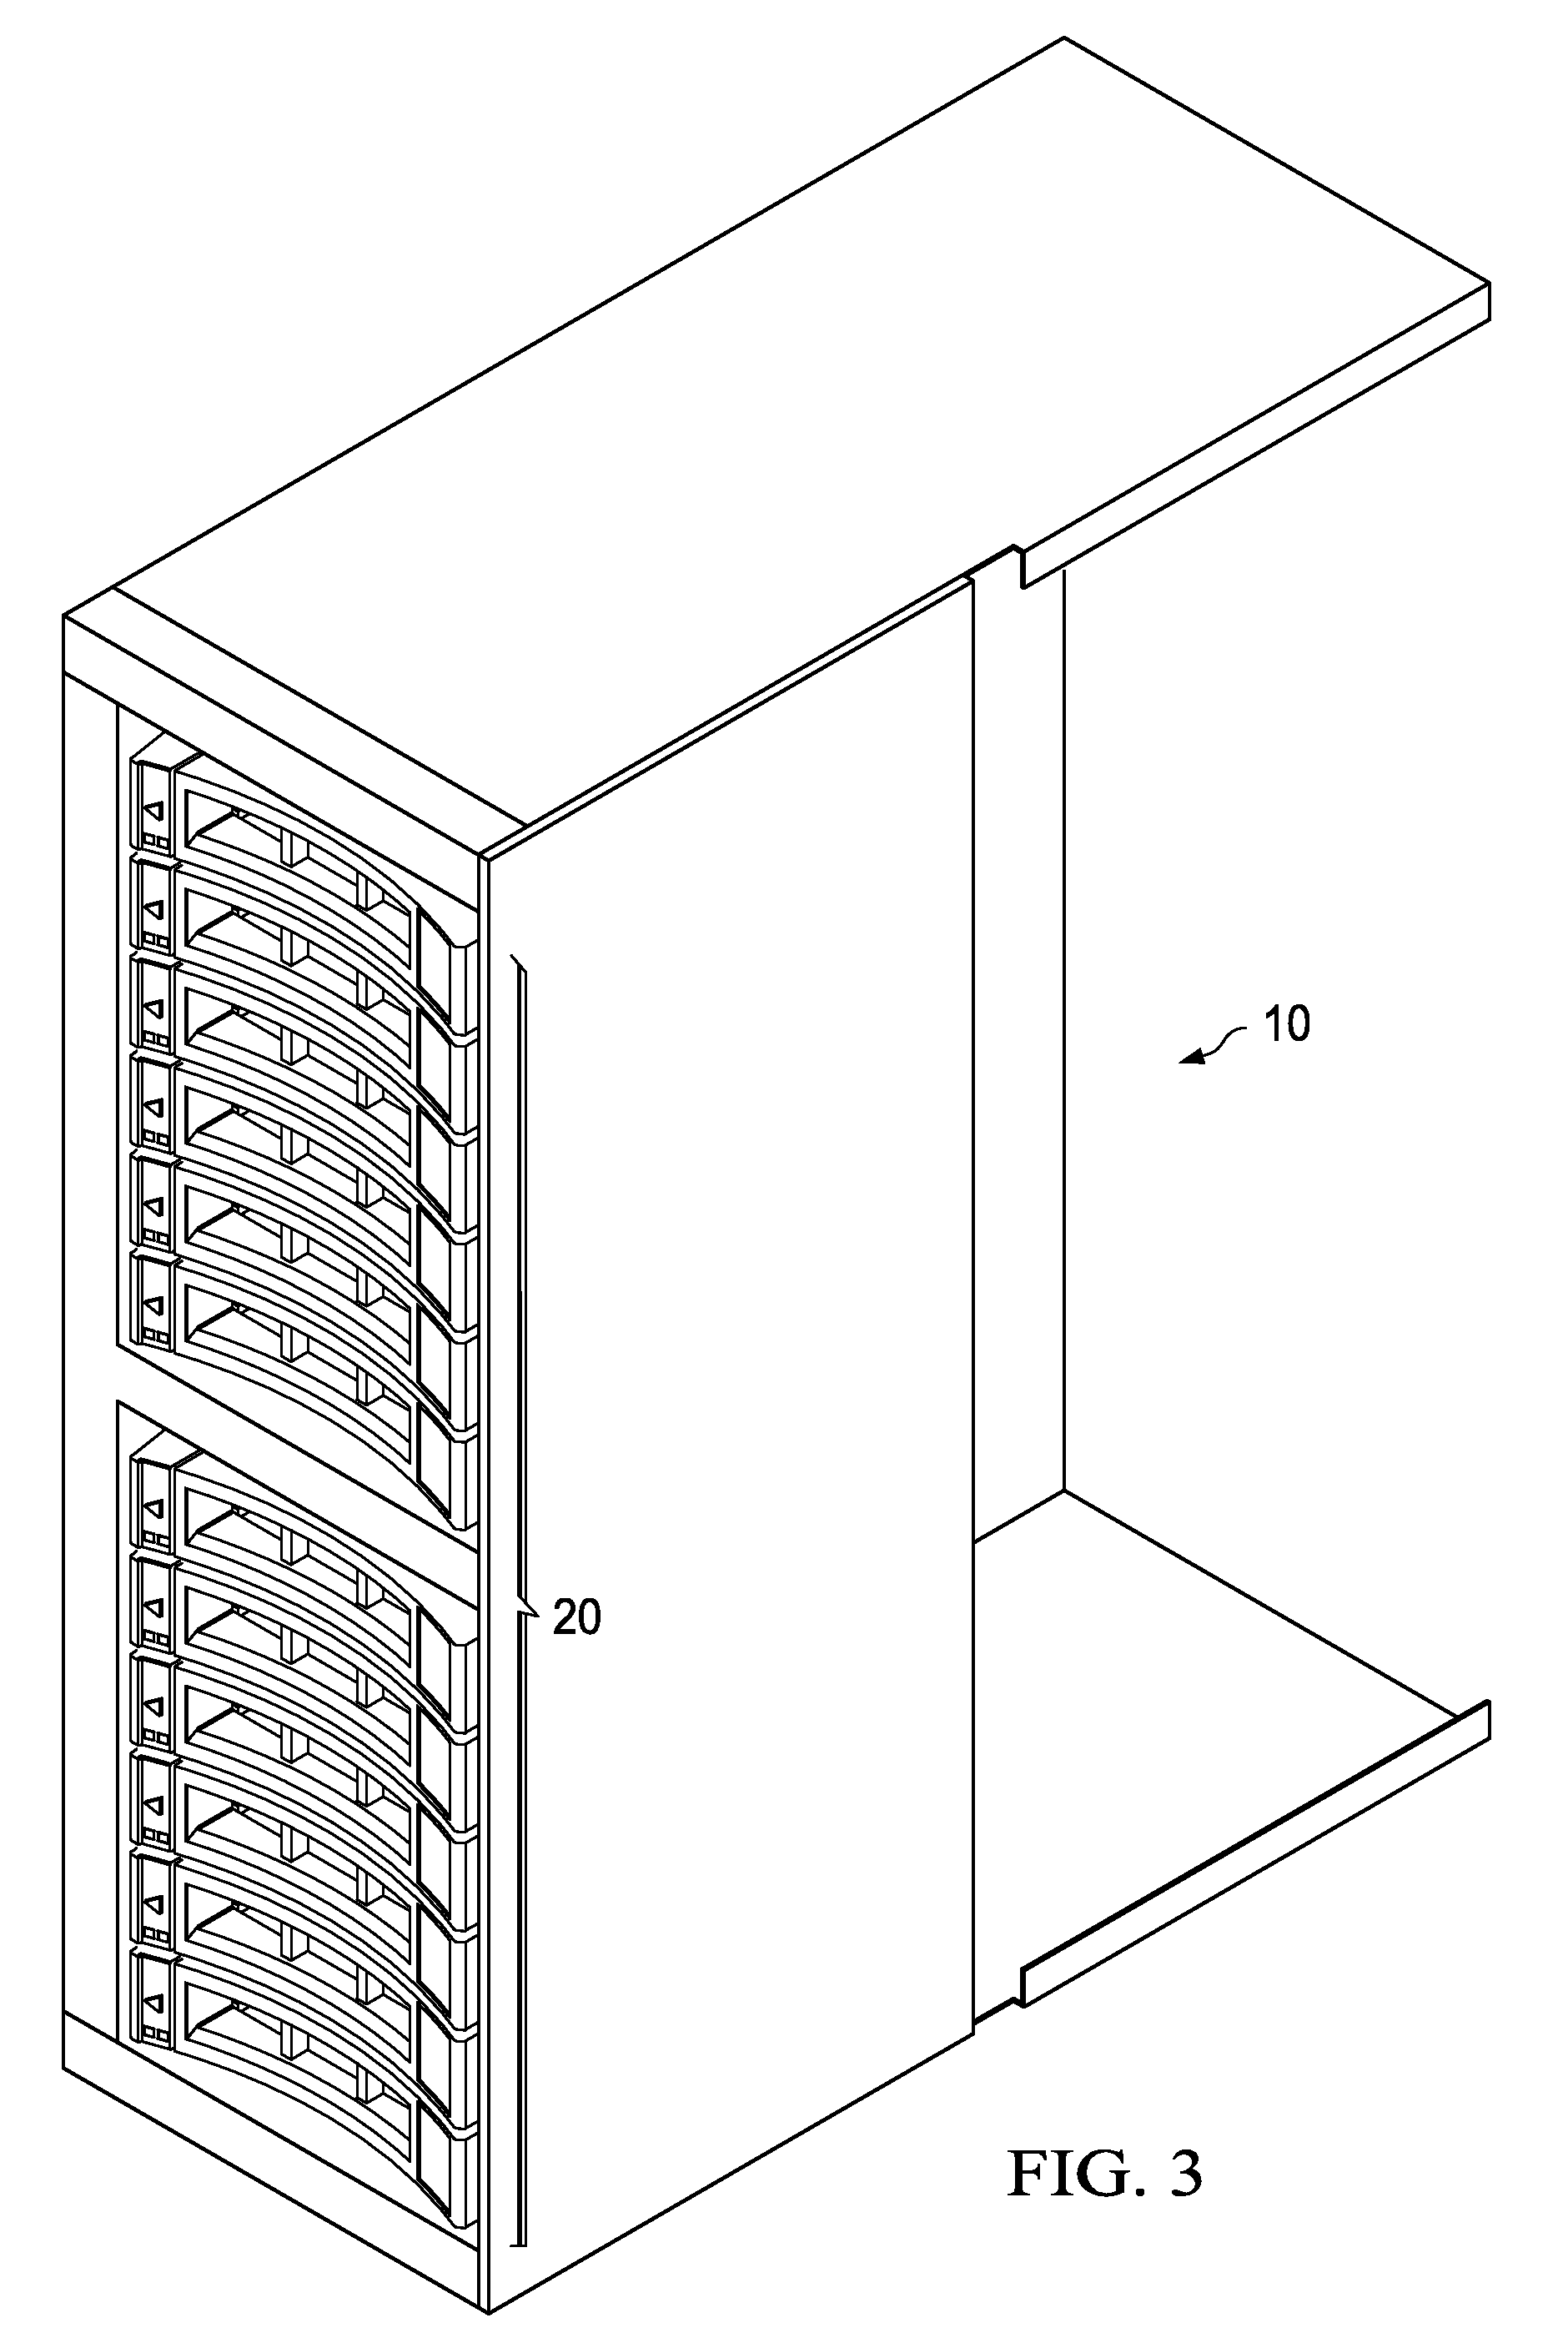 Compact HDD carrier mechanism featuring self actuating EMC springs to prevent HDD component shorting